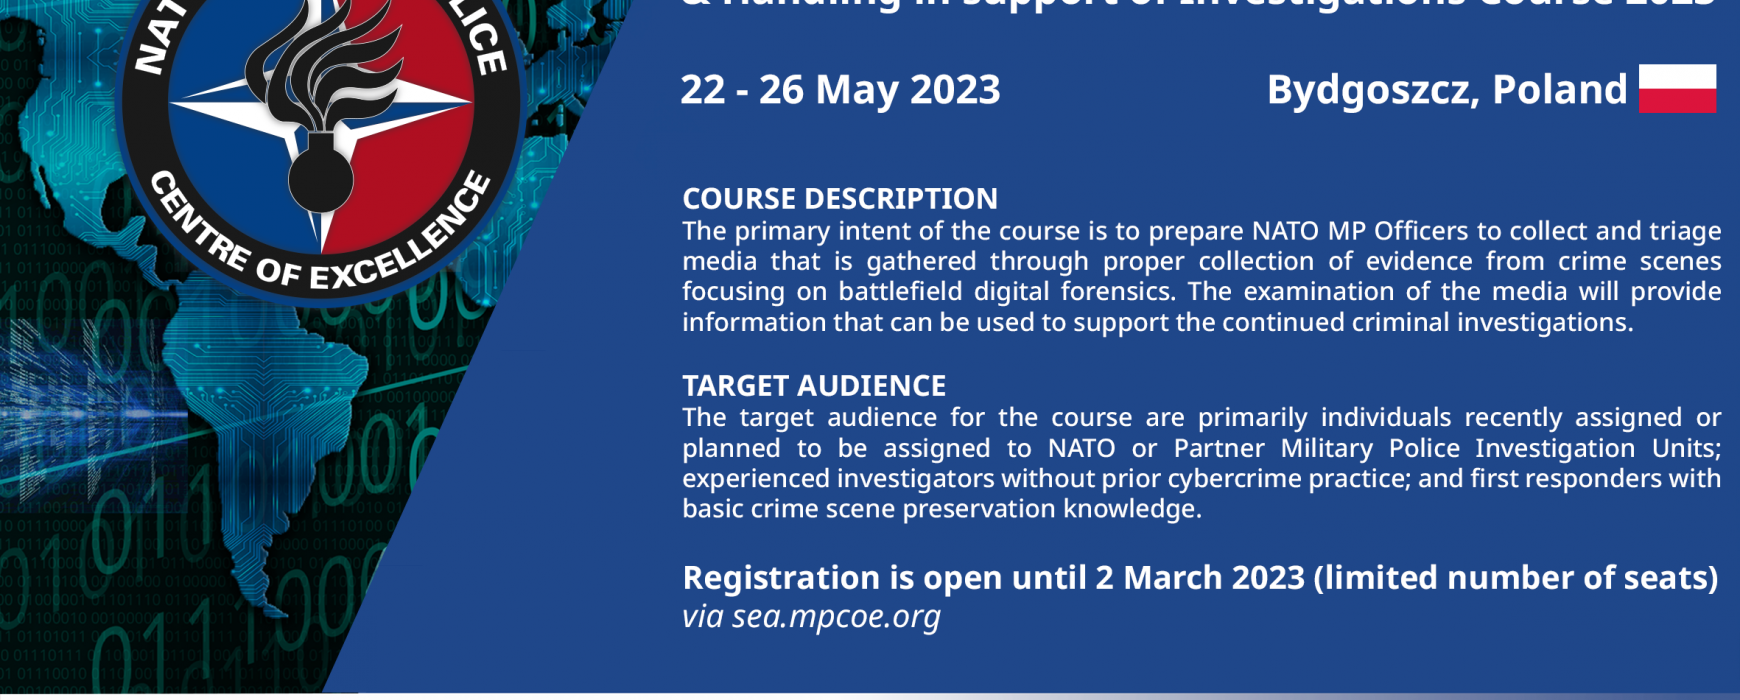 NATO Military Police Digital Evidence Collection and Handling in support of Investigations Course 2023 